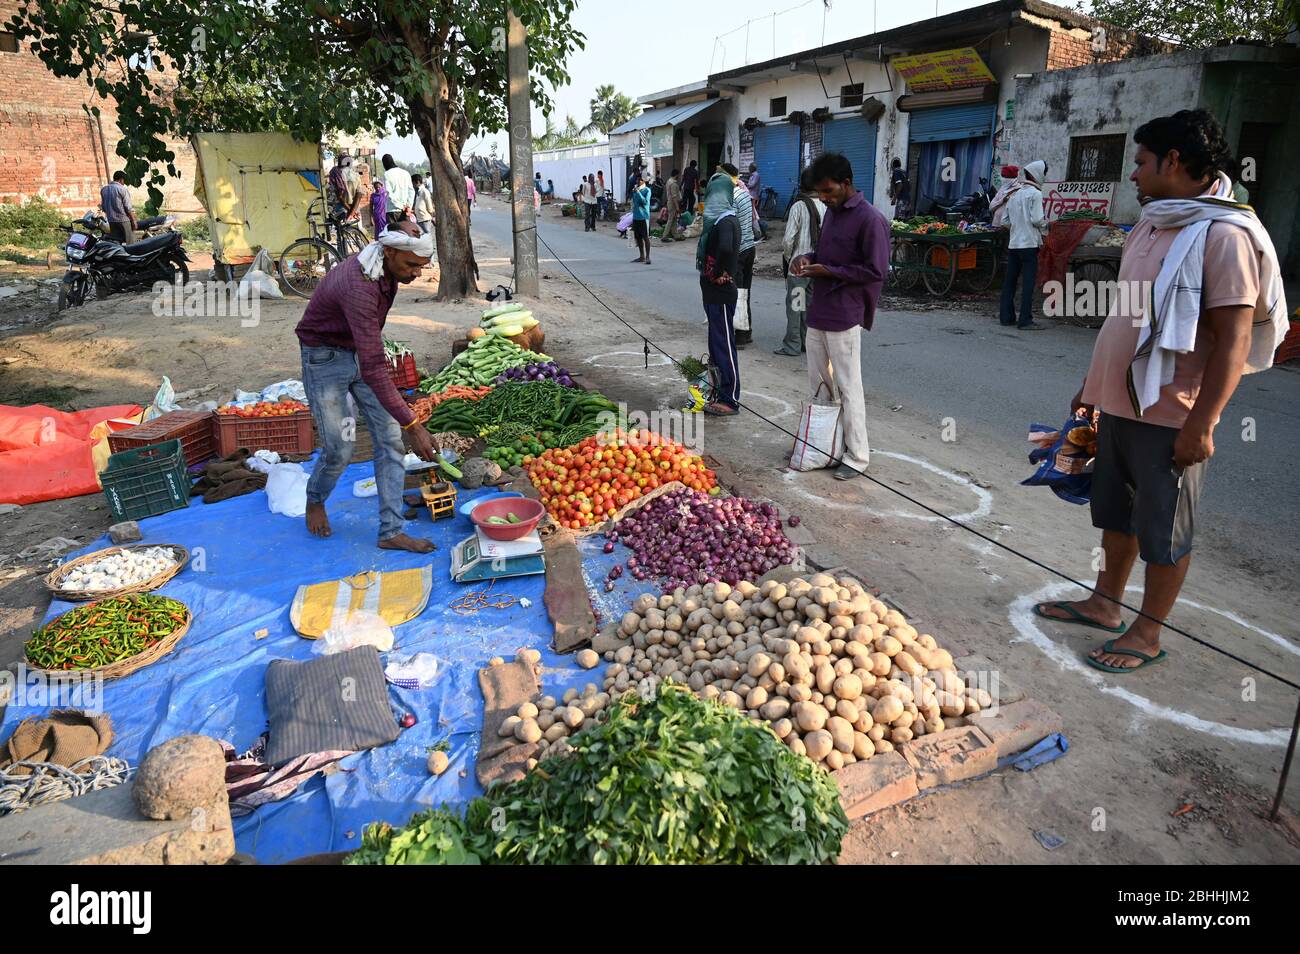 Prayagraj, Uttar Pradesh, India. 26th Apr, 2020. Prayagraj: People maintain social distance at a vegetable market during a government-imposed nationwide lockdown as a preventive measure against the COVID-19 coronavirus, in Allahabad on April 26, 2020. Credit: Prabhat Kumar Verma/ZUMA Wire/Alamy Live News Stock Photo